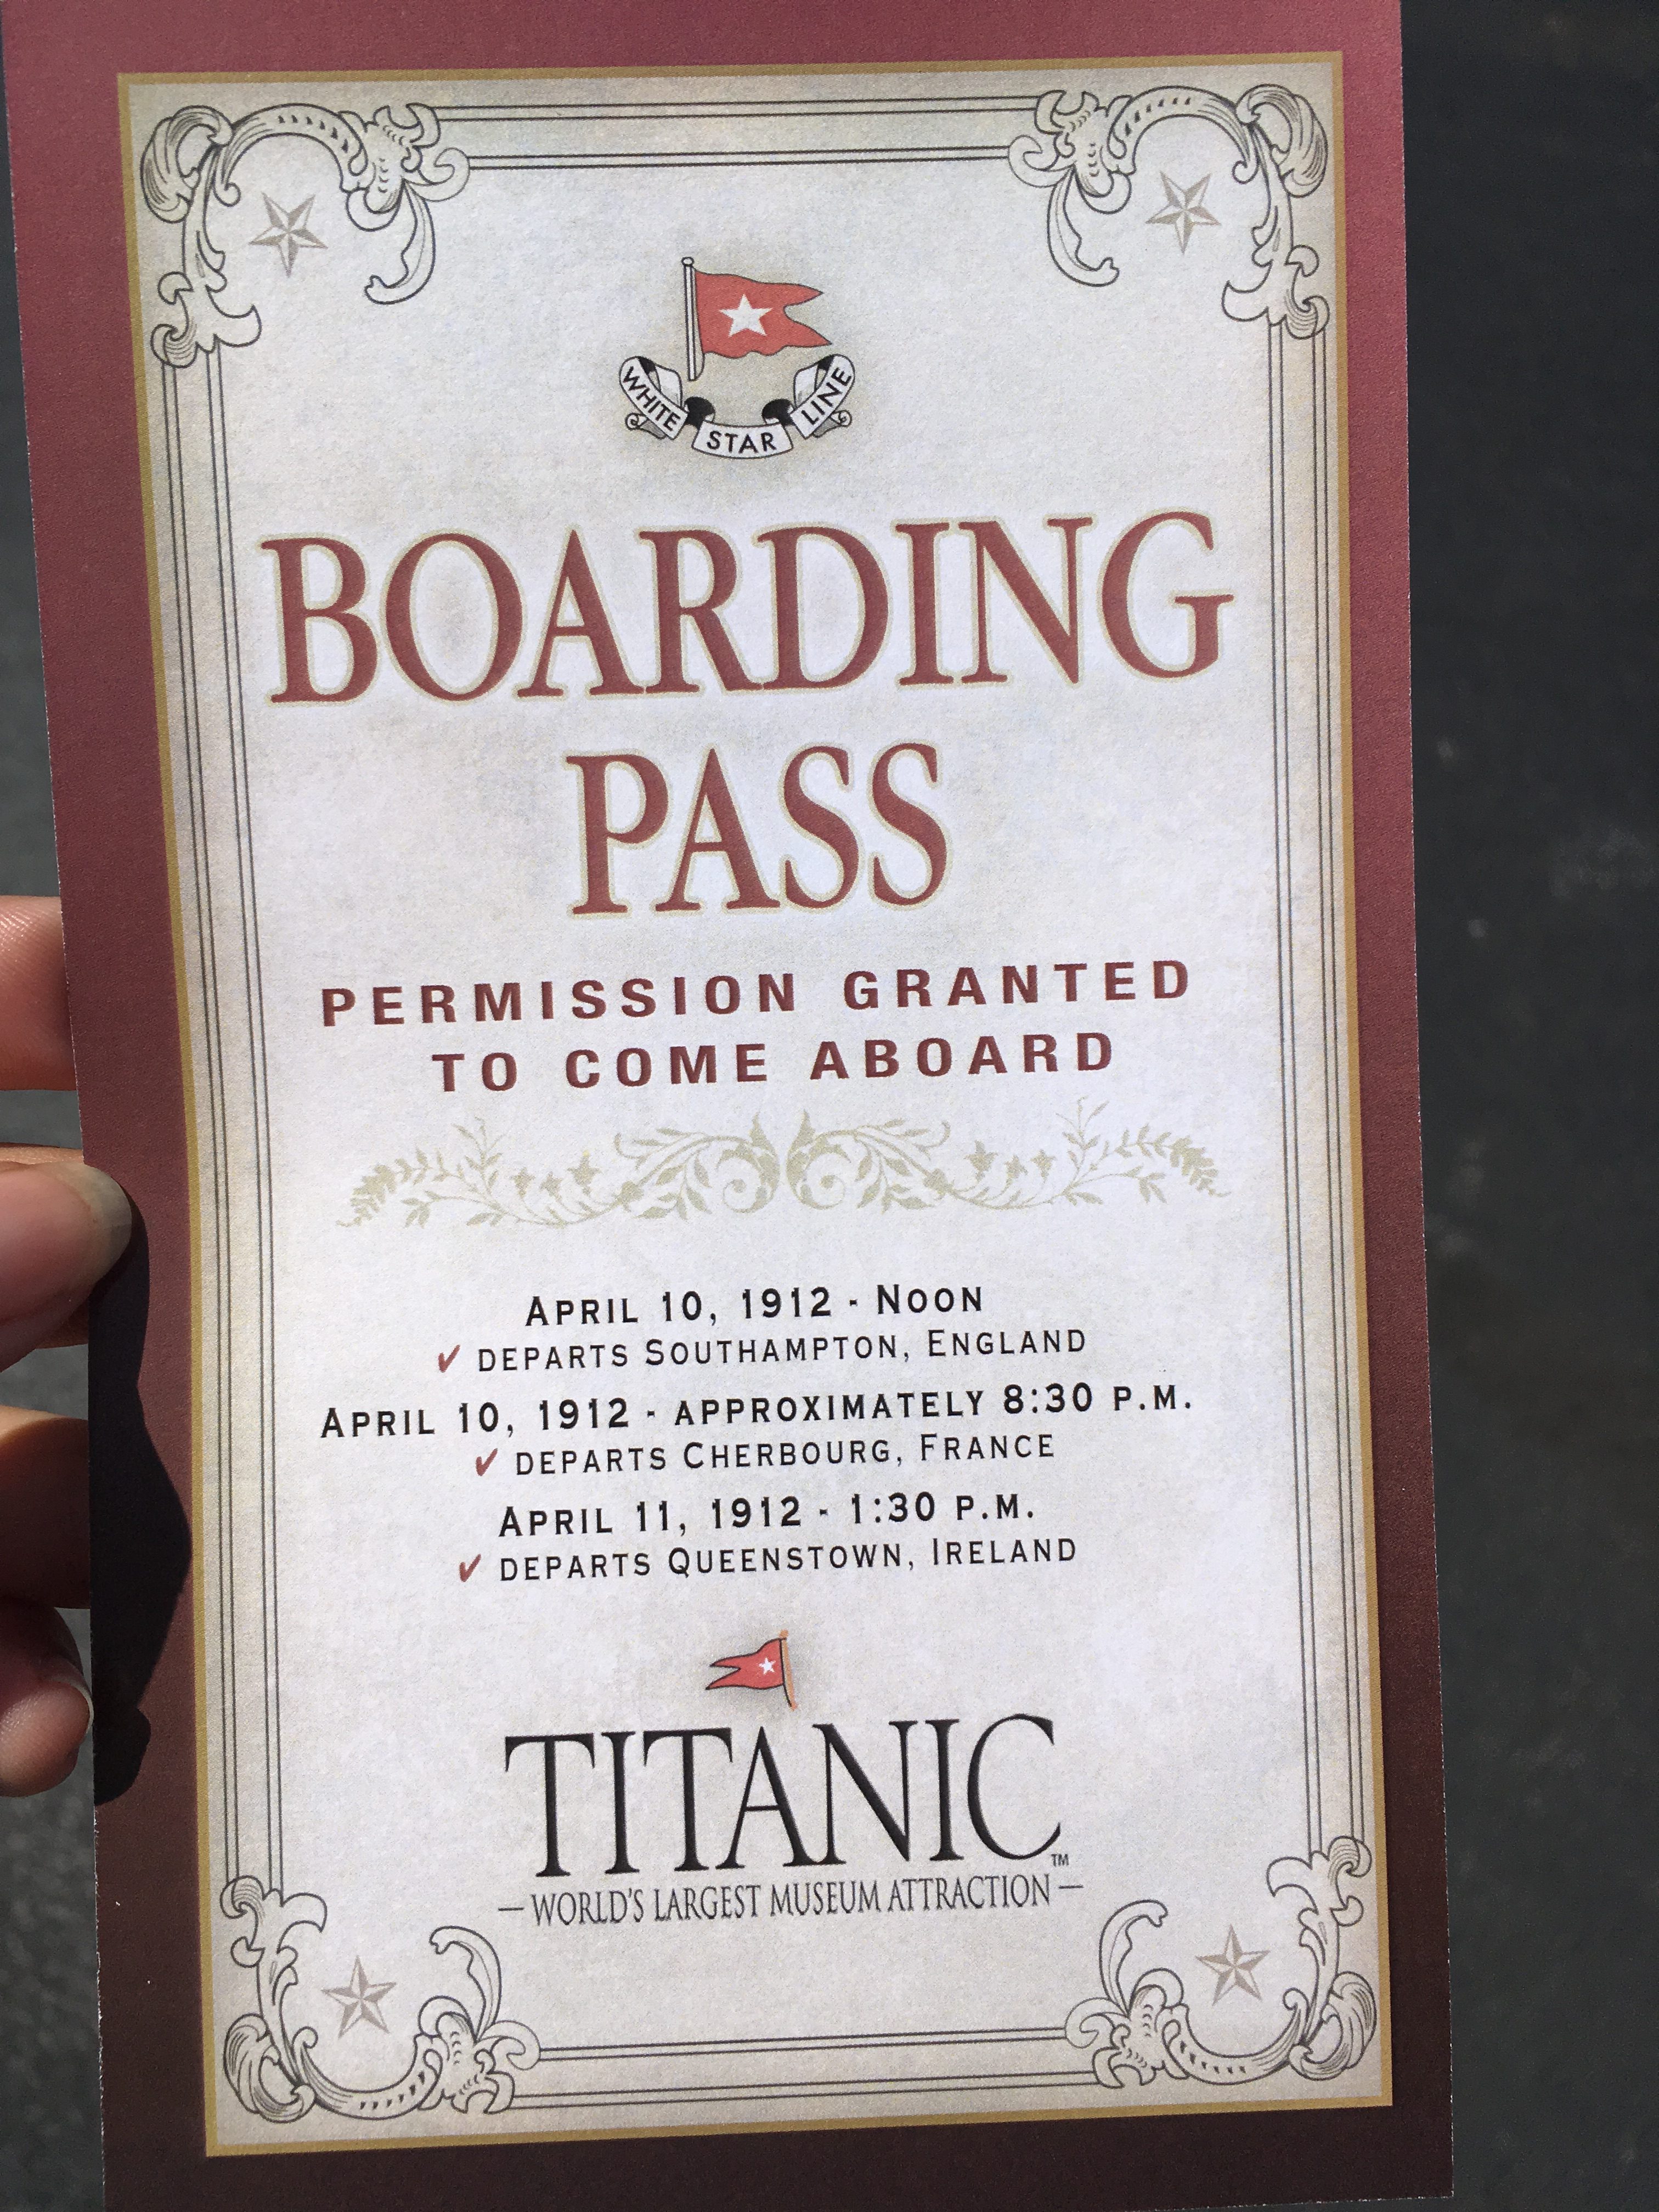 Titanic - The World’s Largest Museum Attraction in Branson